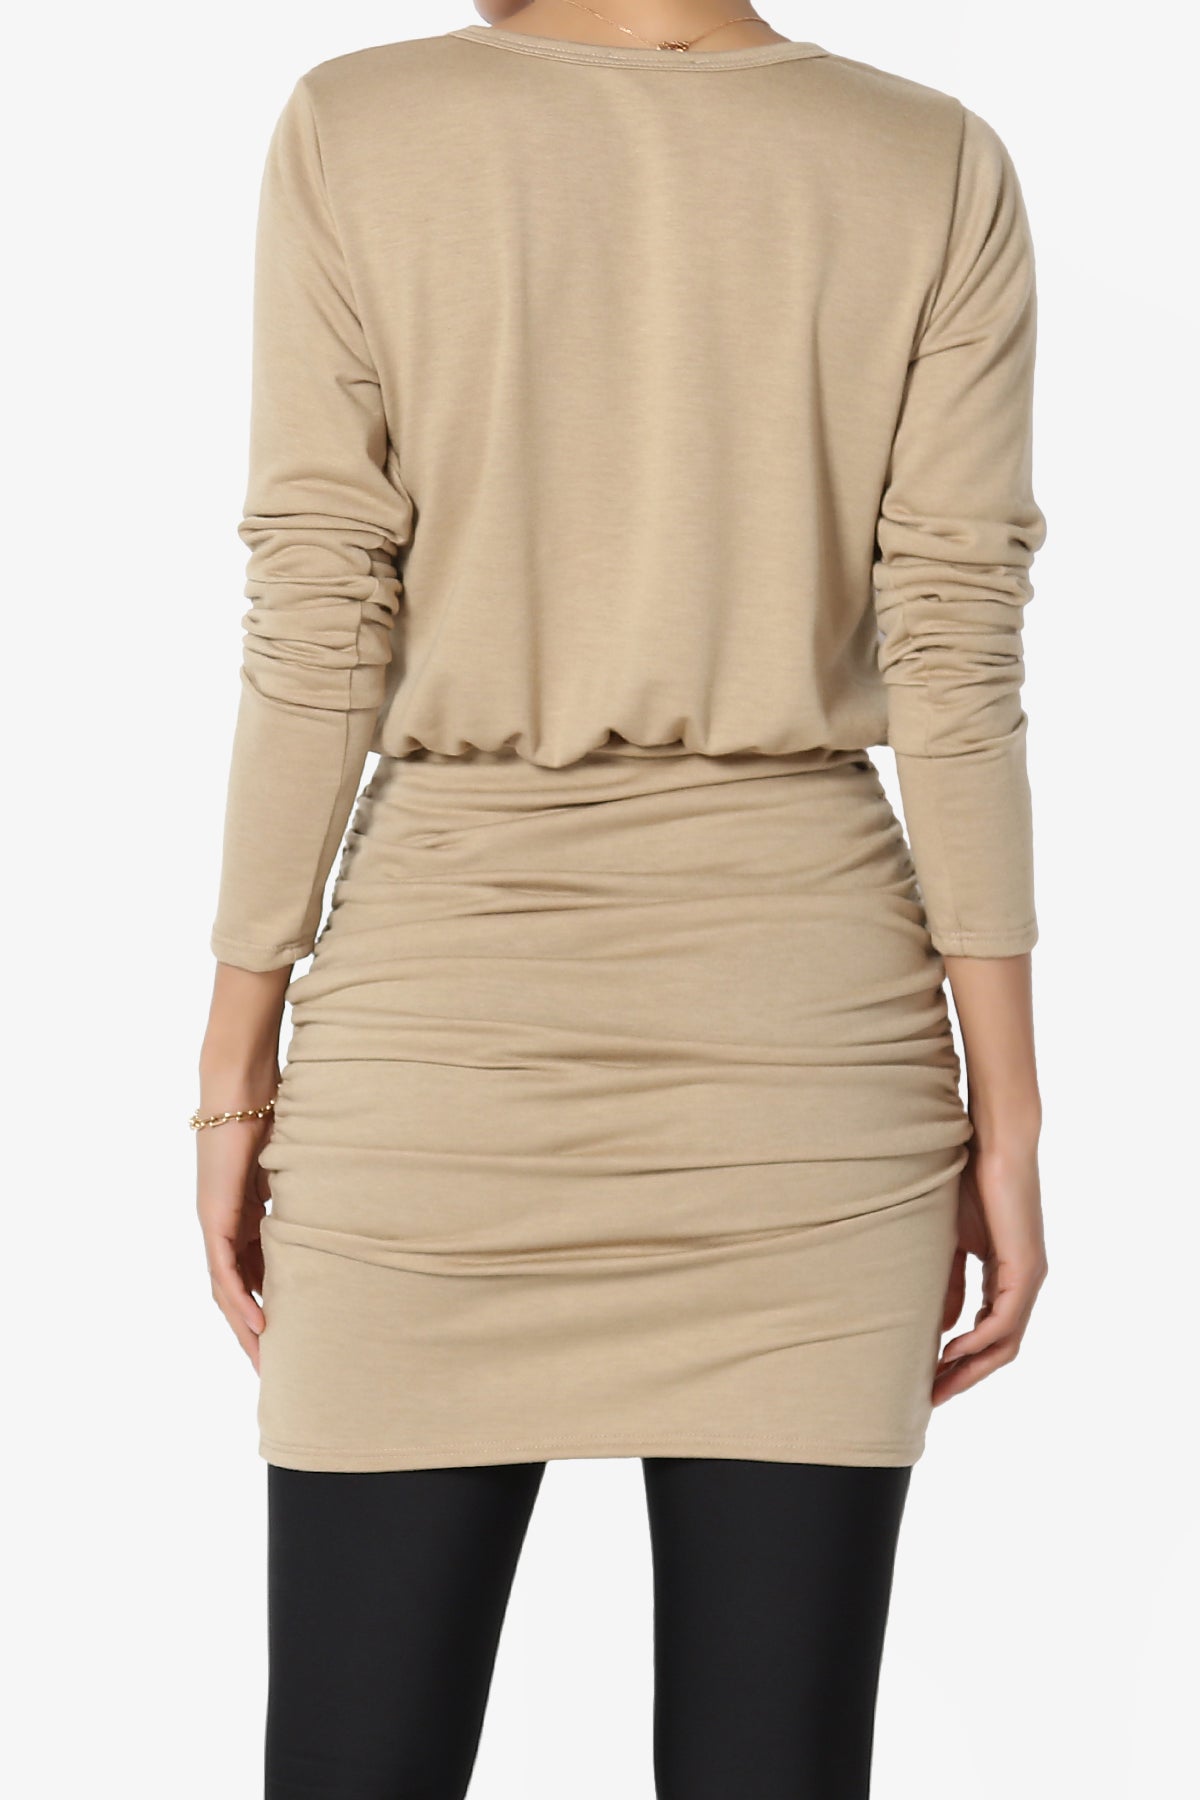 Prowl Ruched Long Sleeve T-Shirt Dress